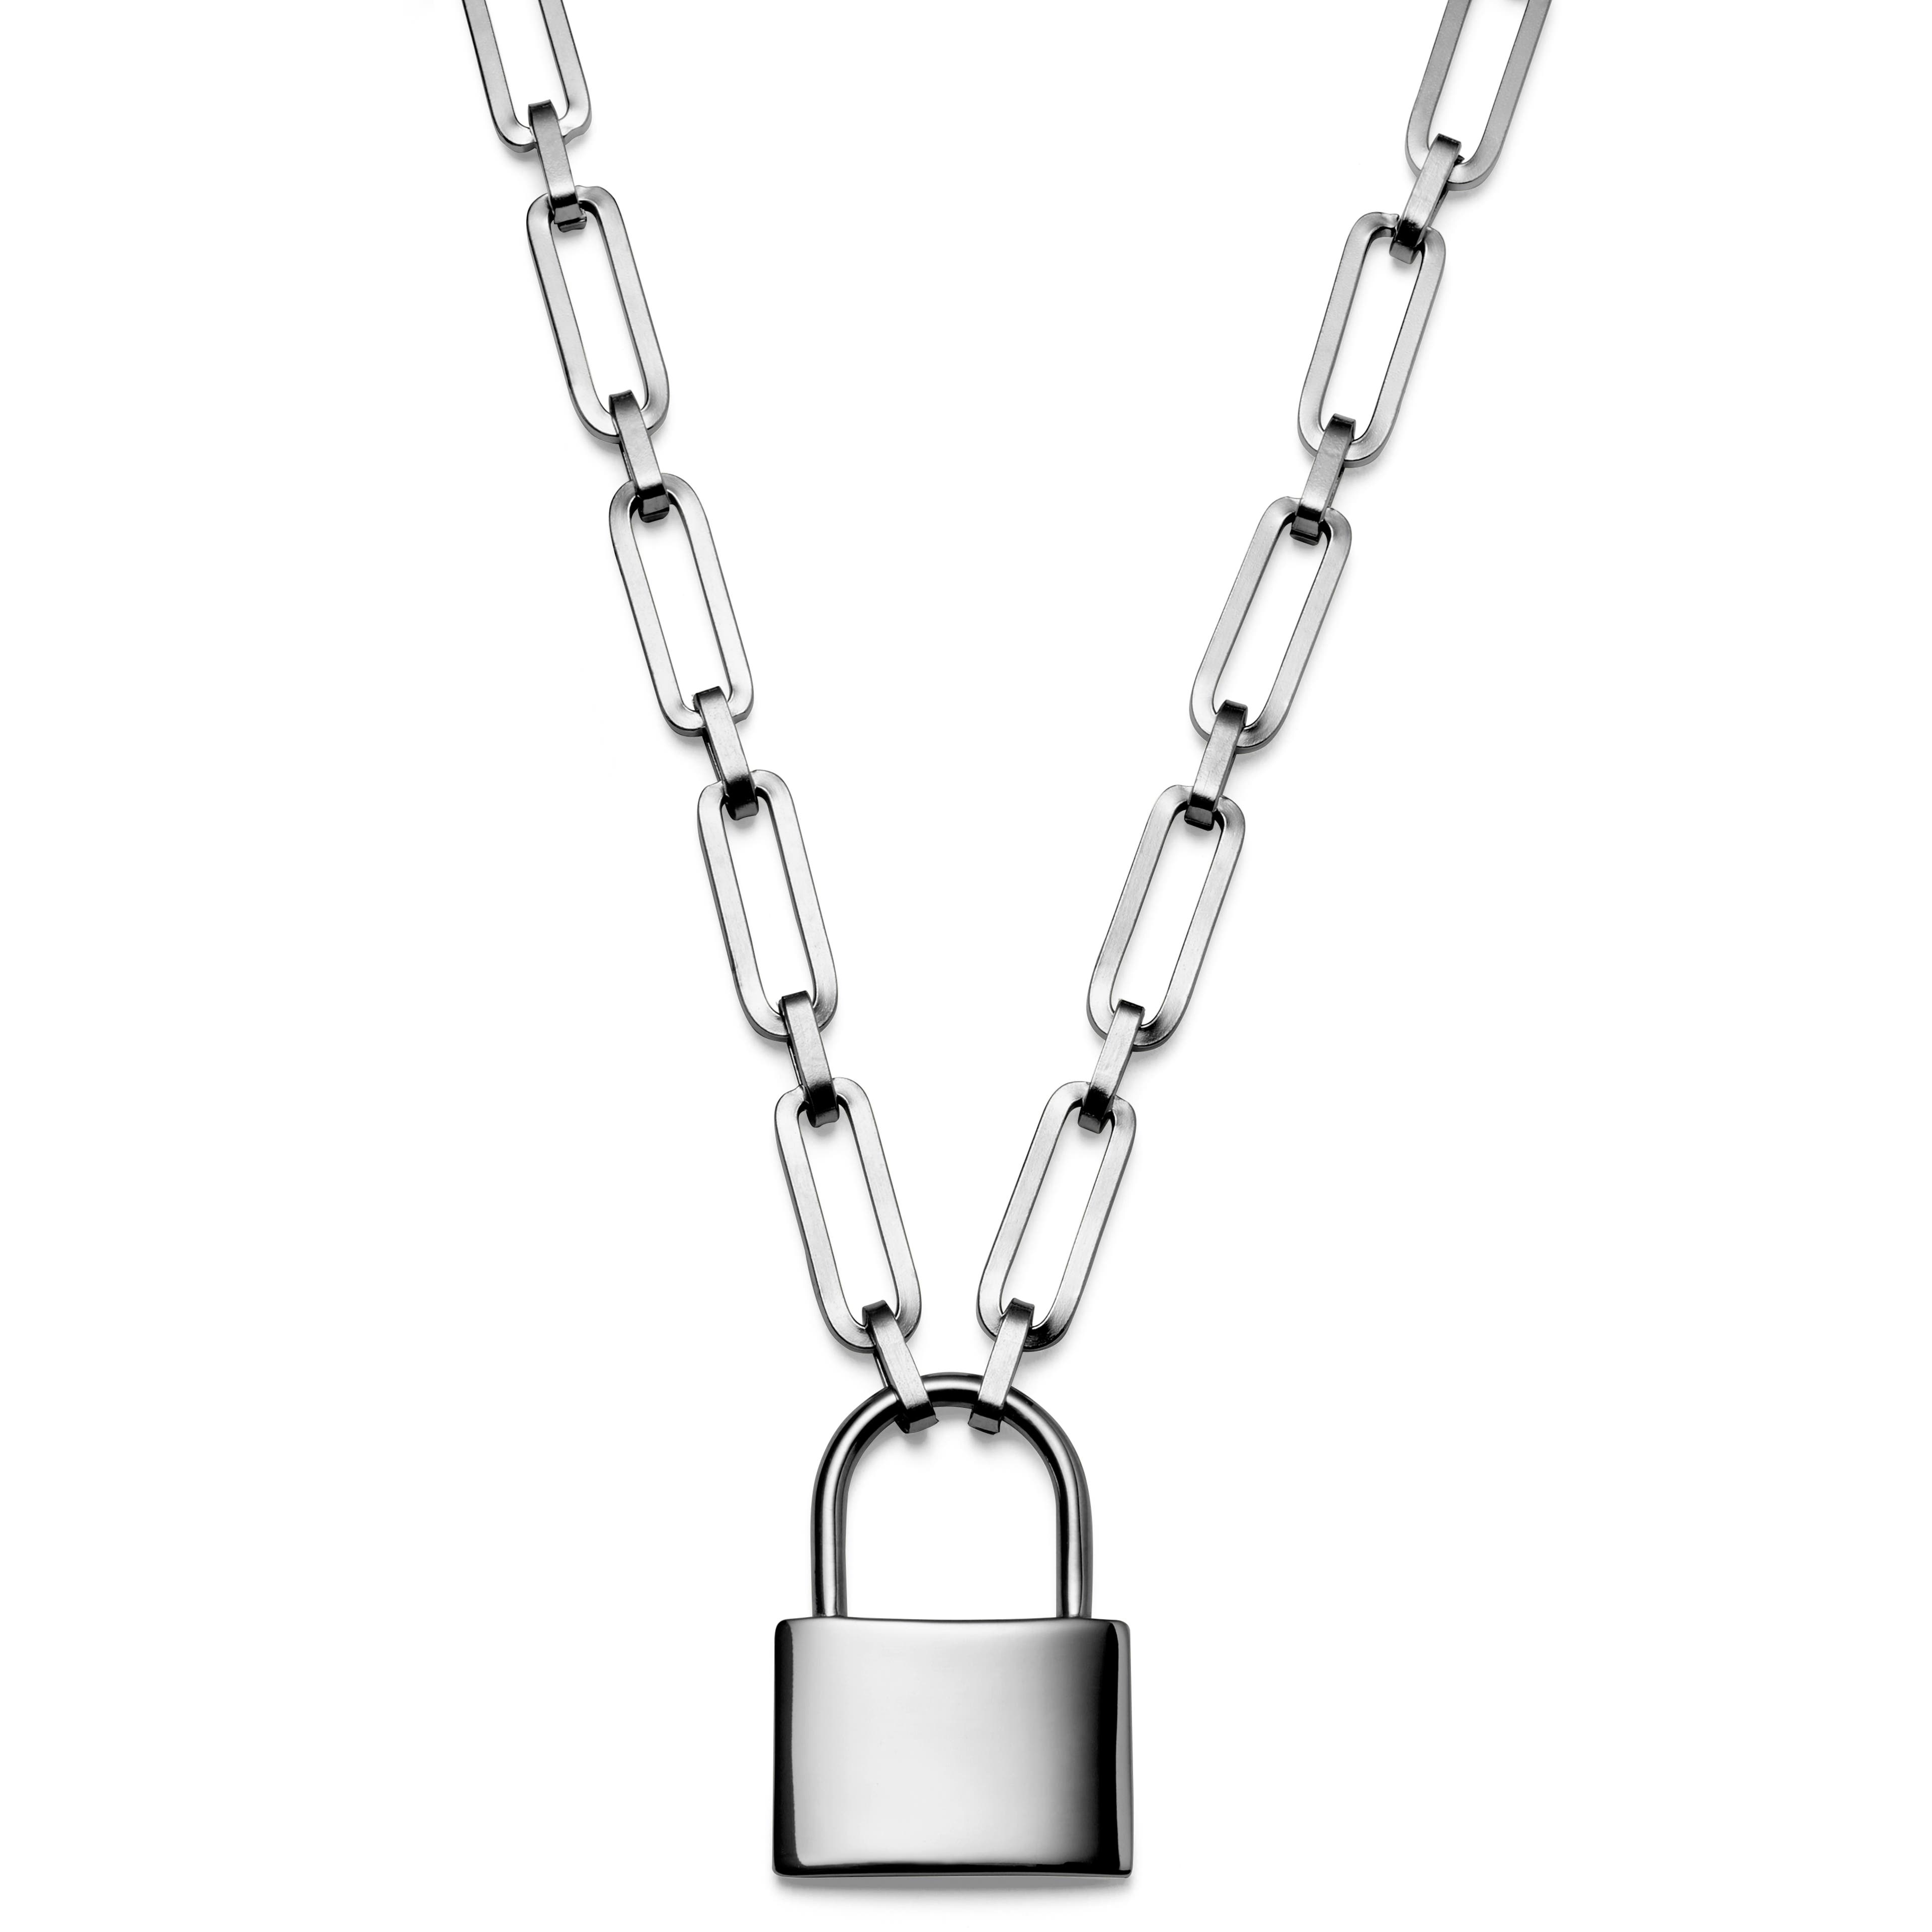 Silver Stainless Steel Lock Pendant Necklace Padlock Charms Chain